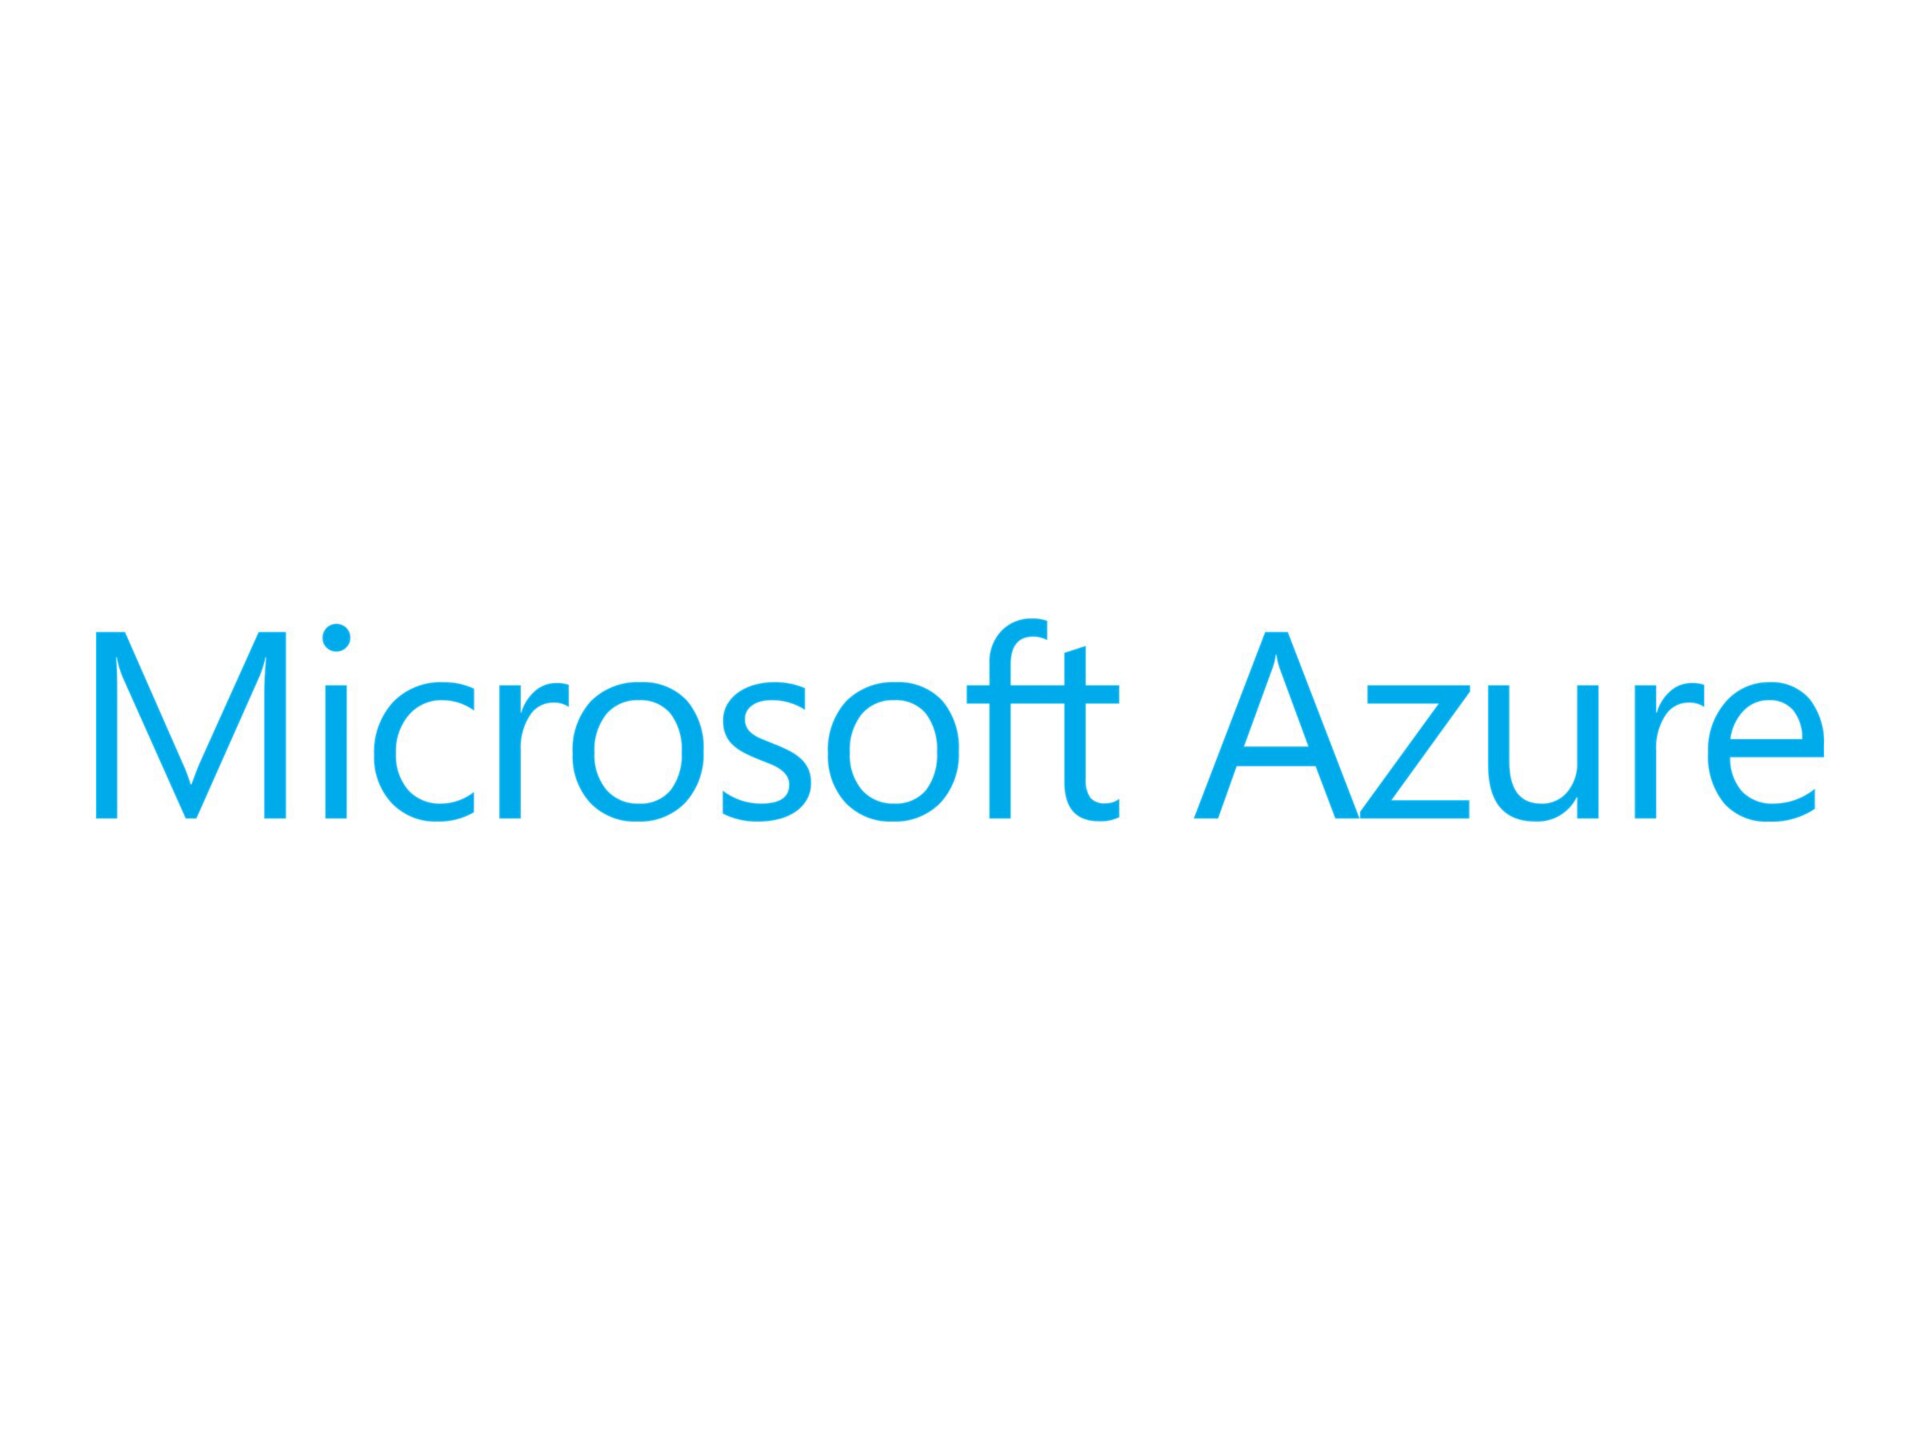 Microsoft Azure Monitor - fee - 200 GB capacity reservation per day